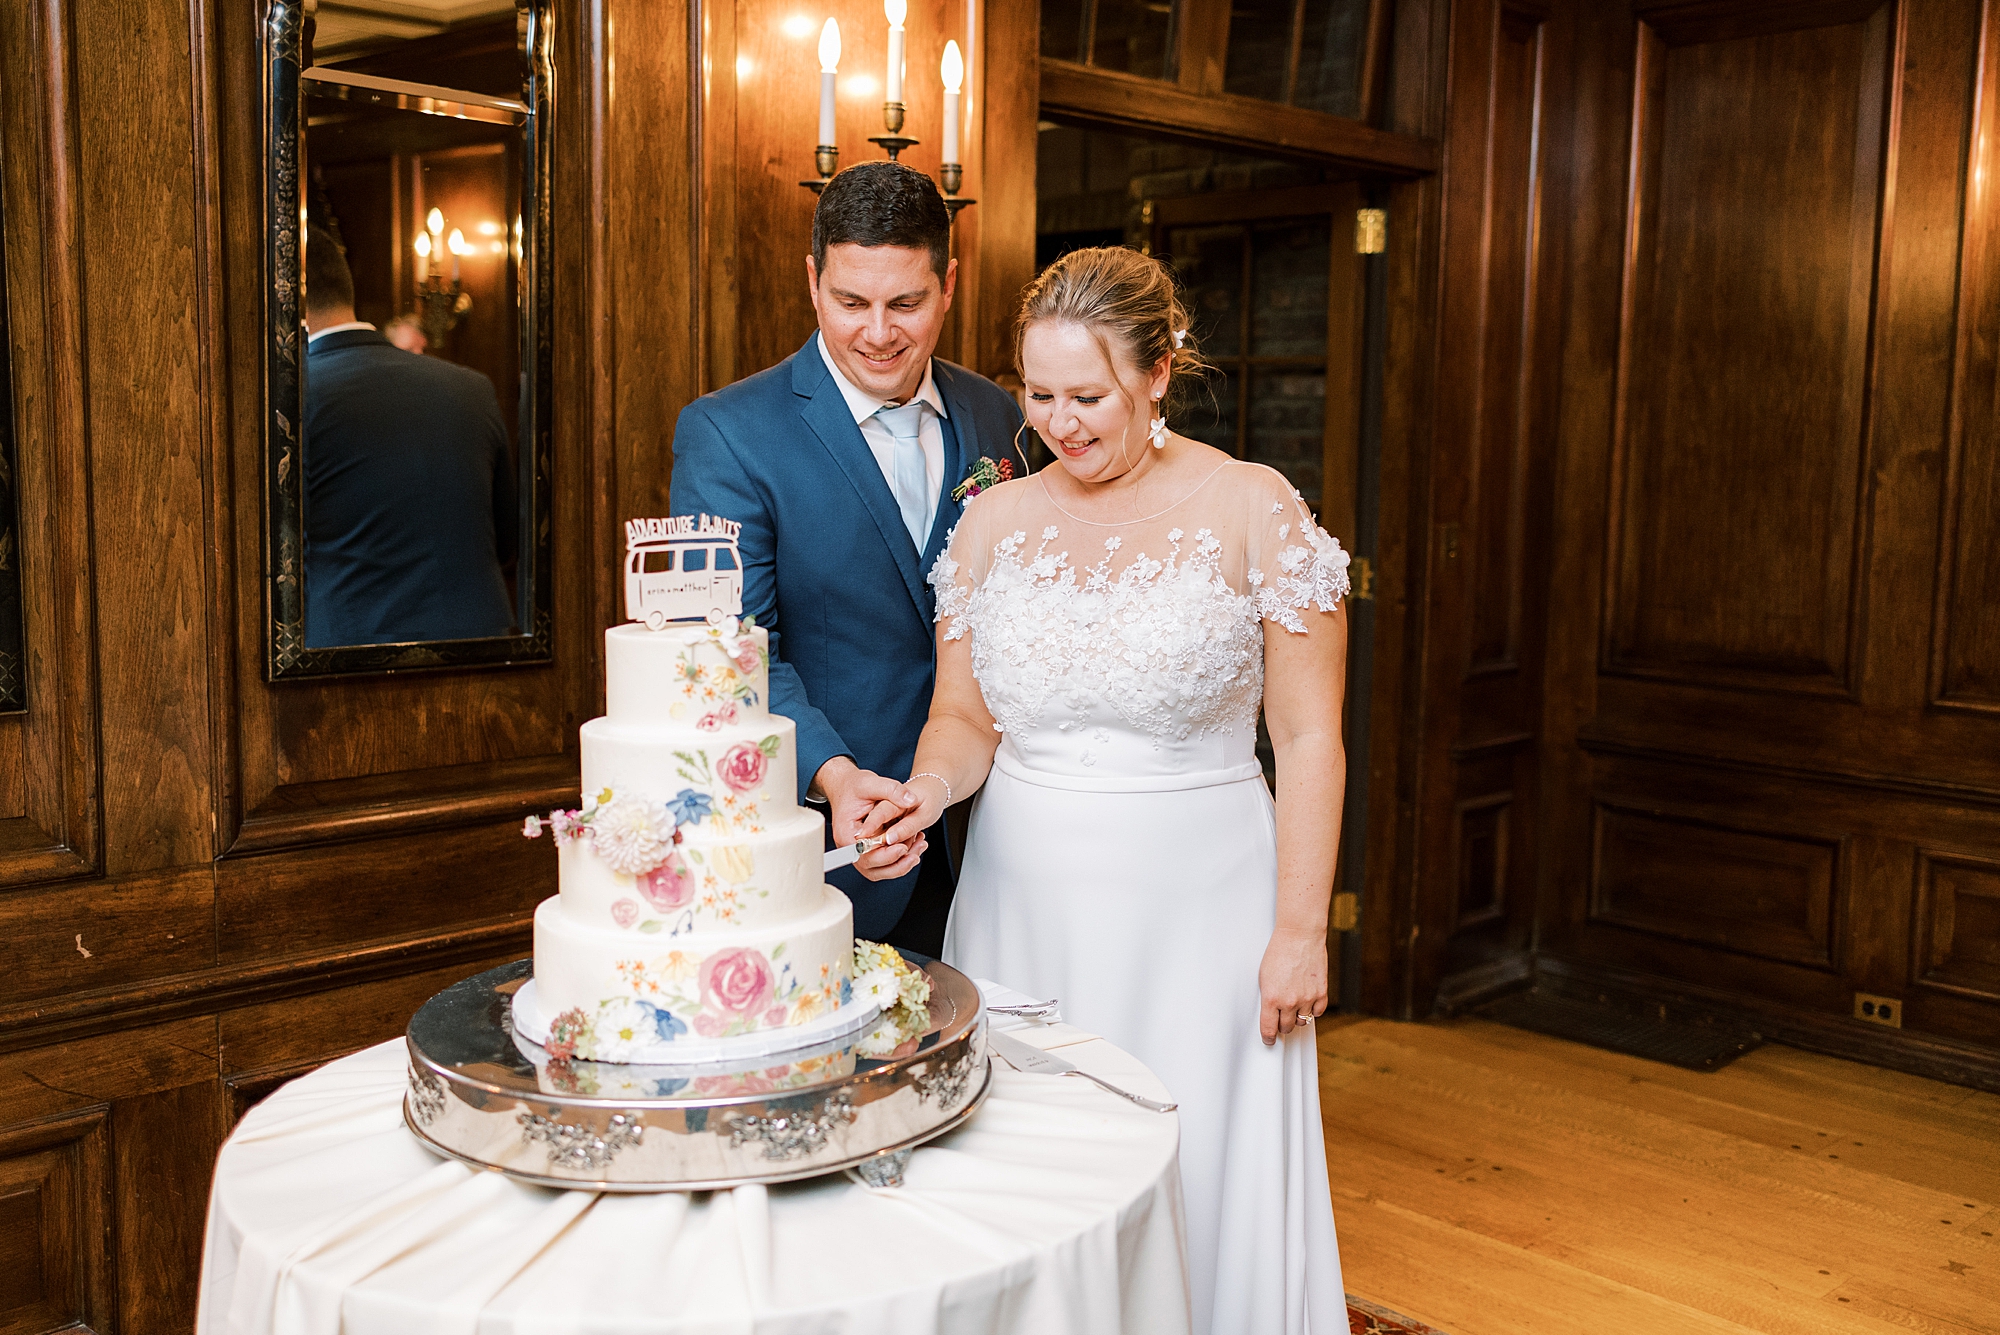 newlyweds cut wedding cake at Greenville Country Club